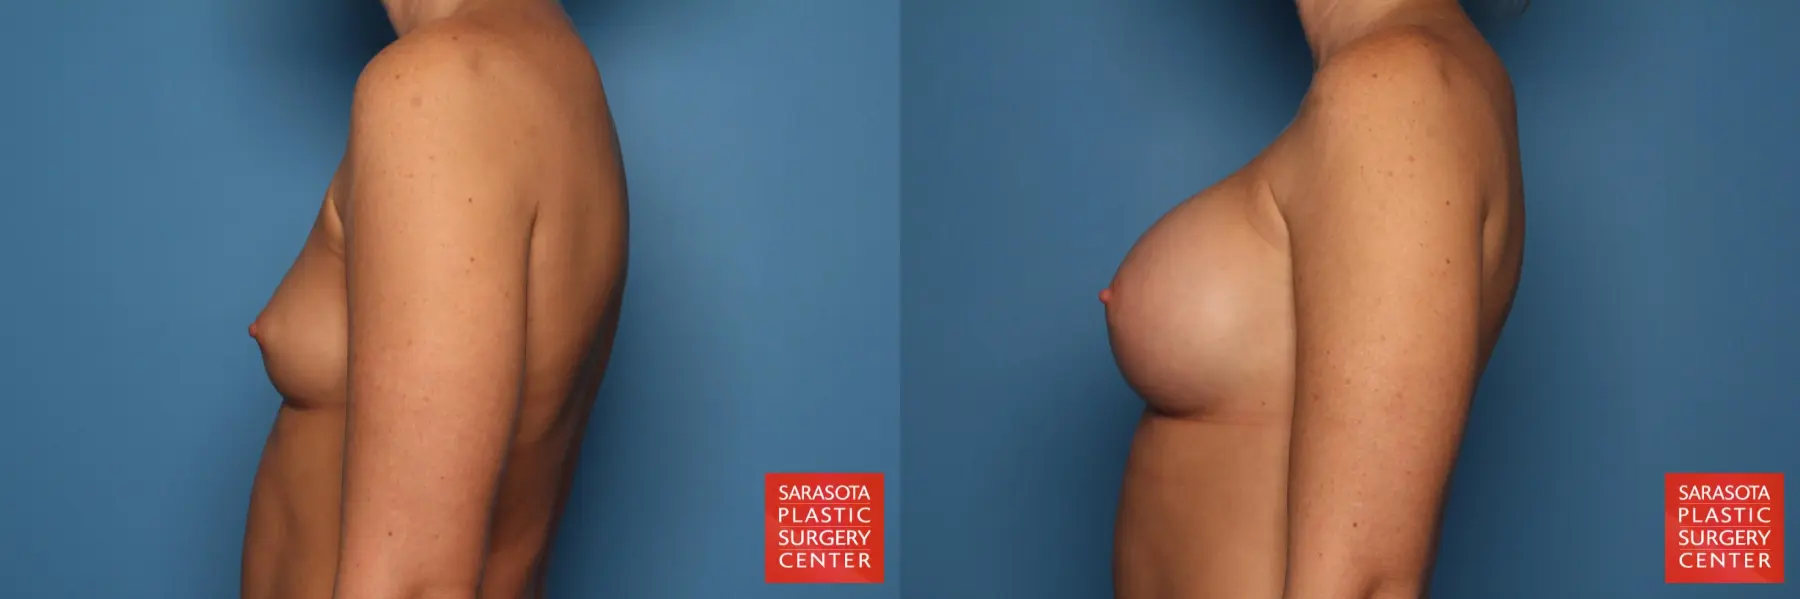 Breast Augmentation: Patient 1 - Before and After 3